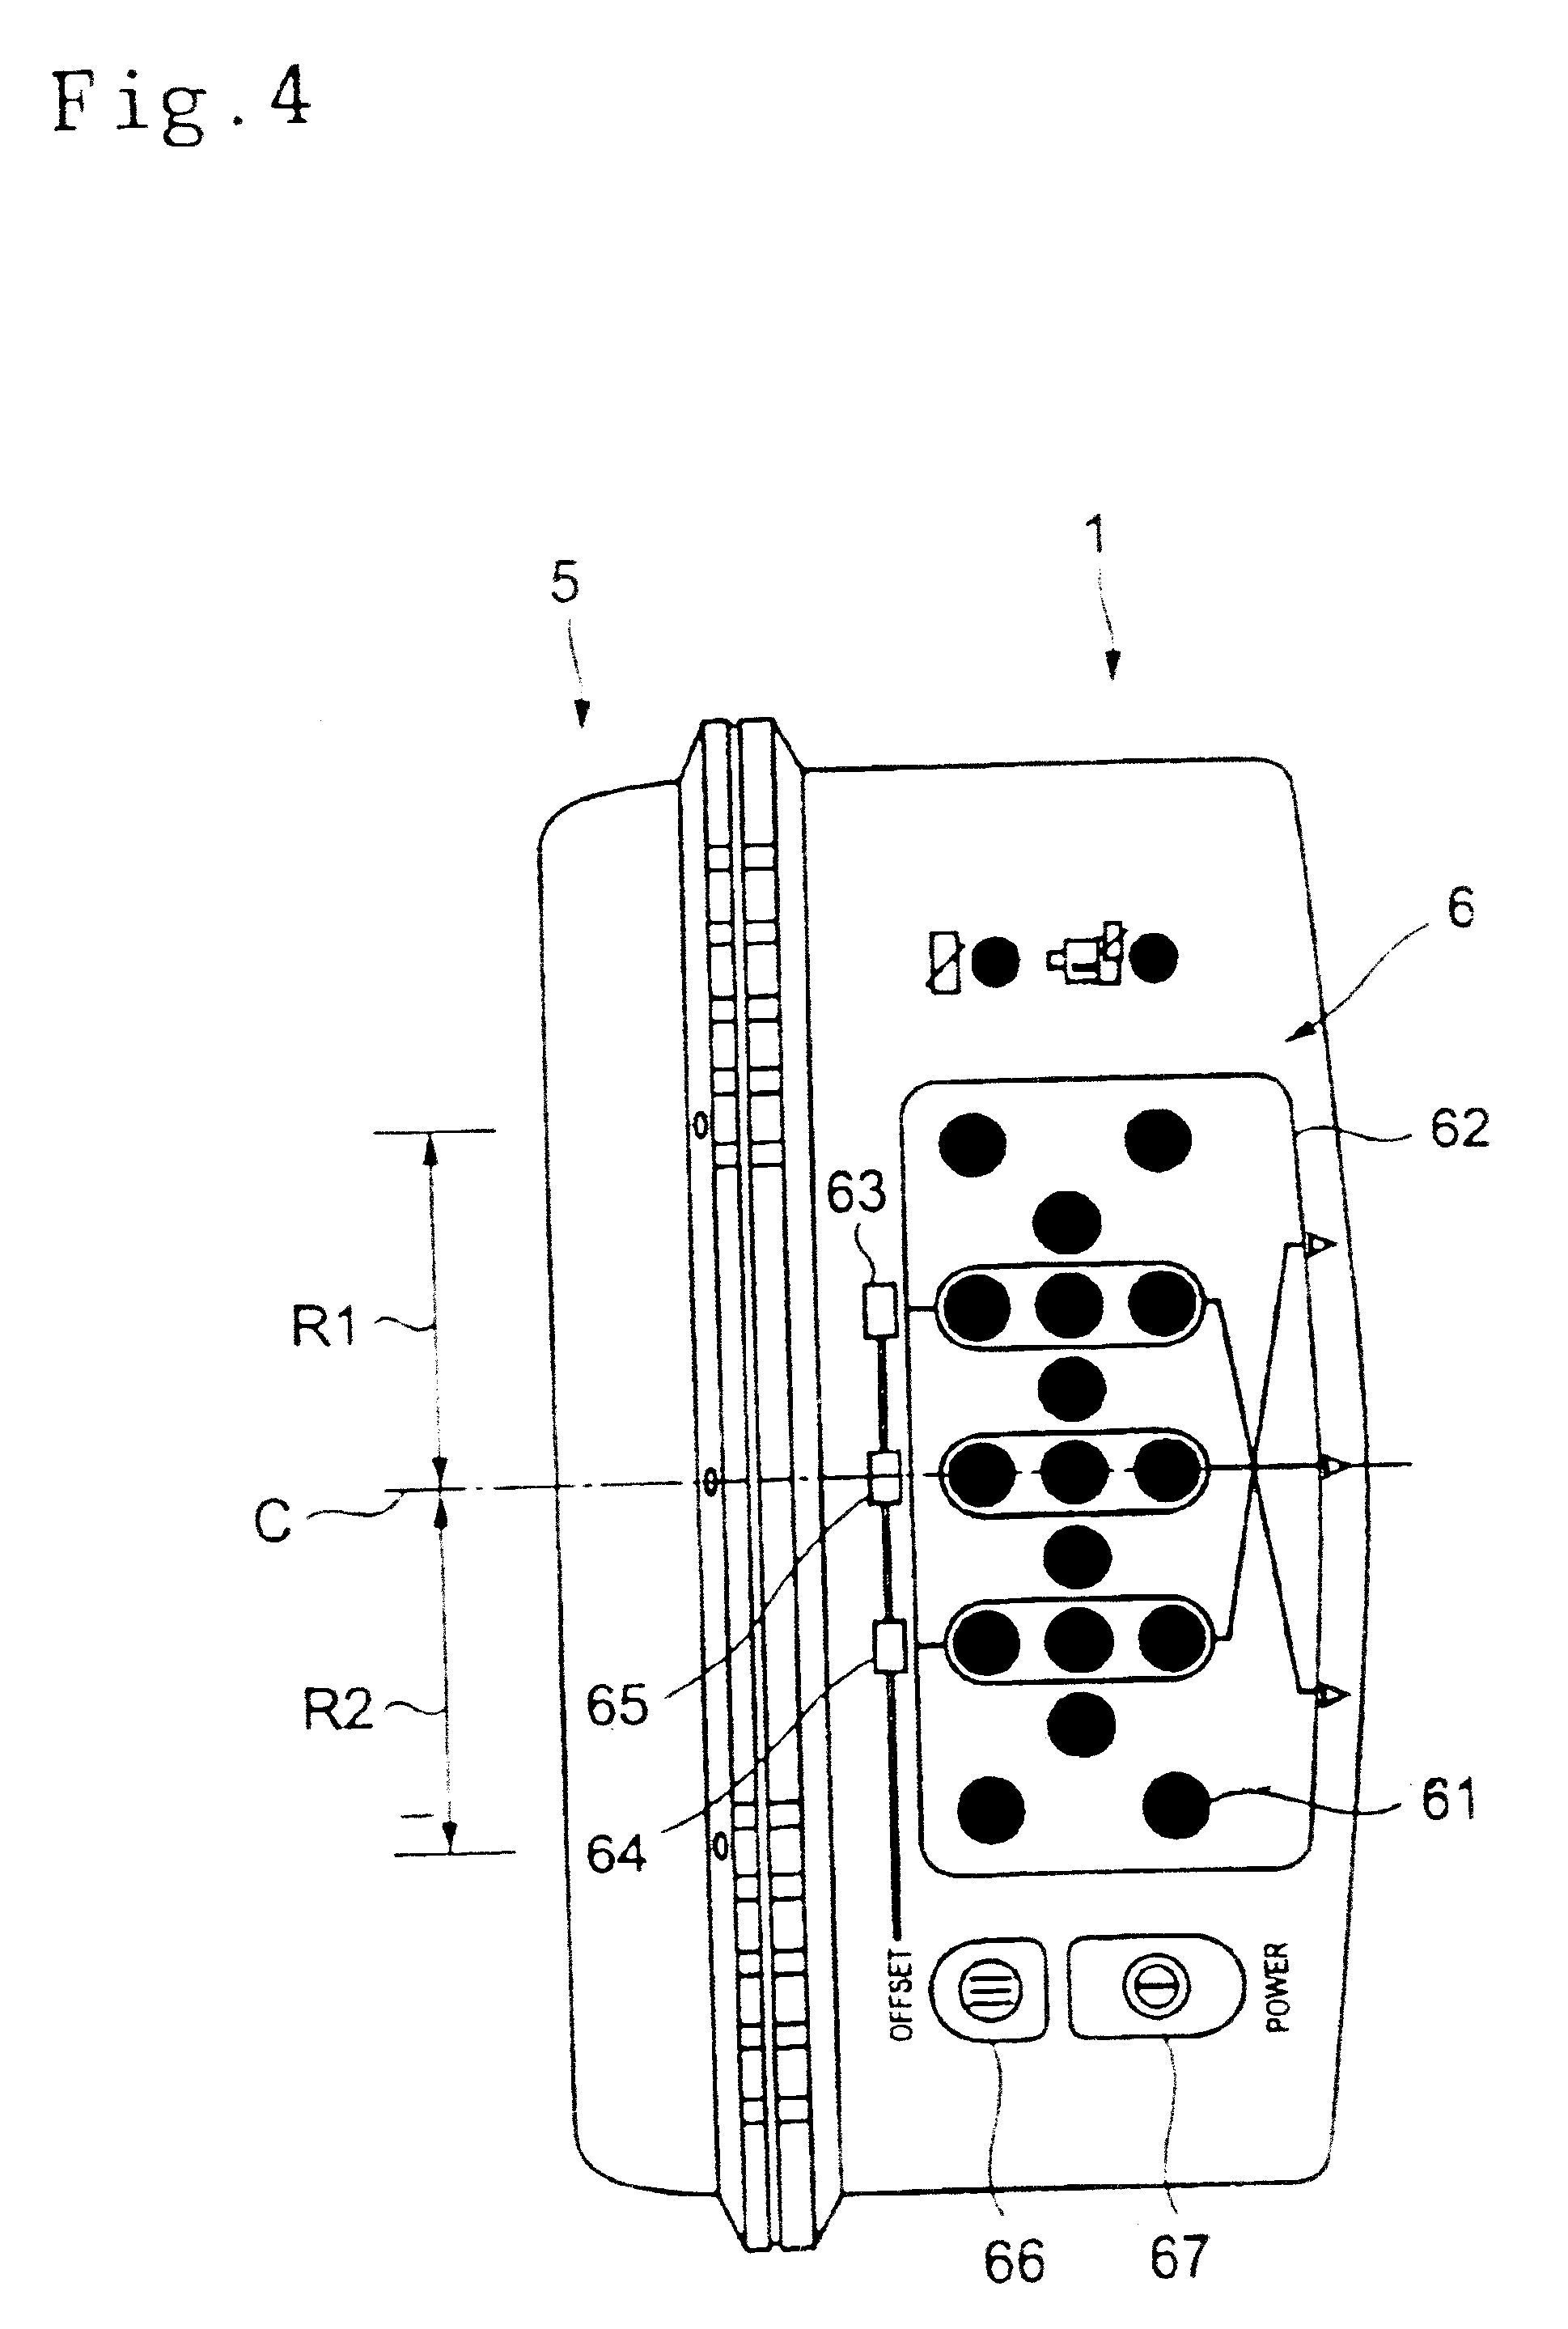 Laser beam detecting device for a construction machine